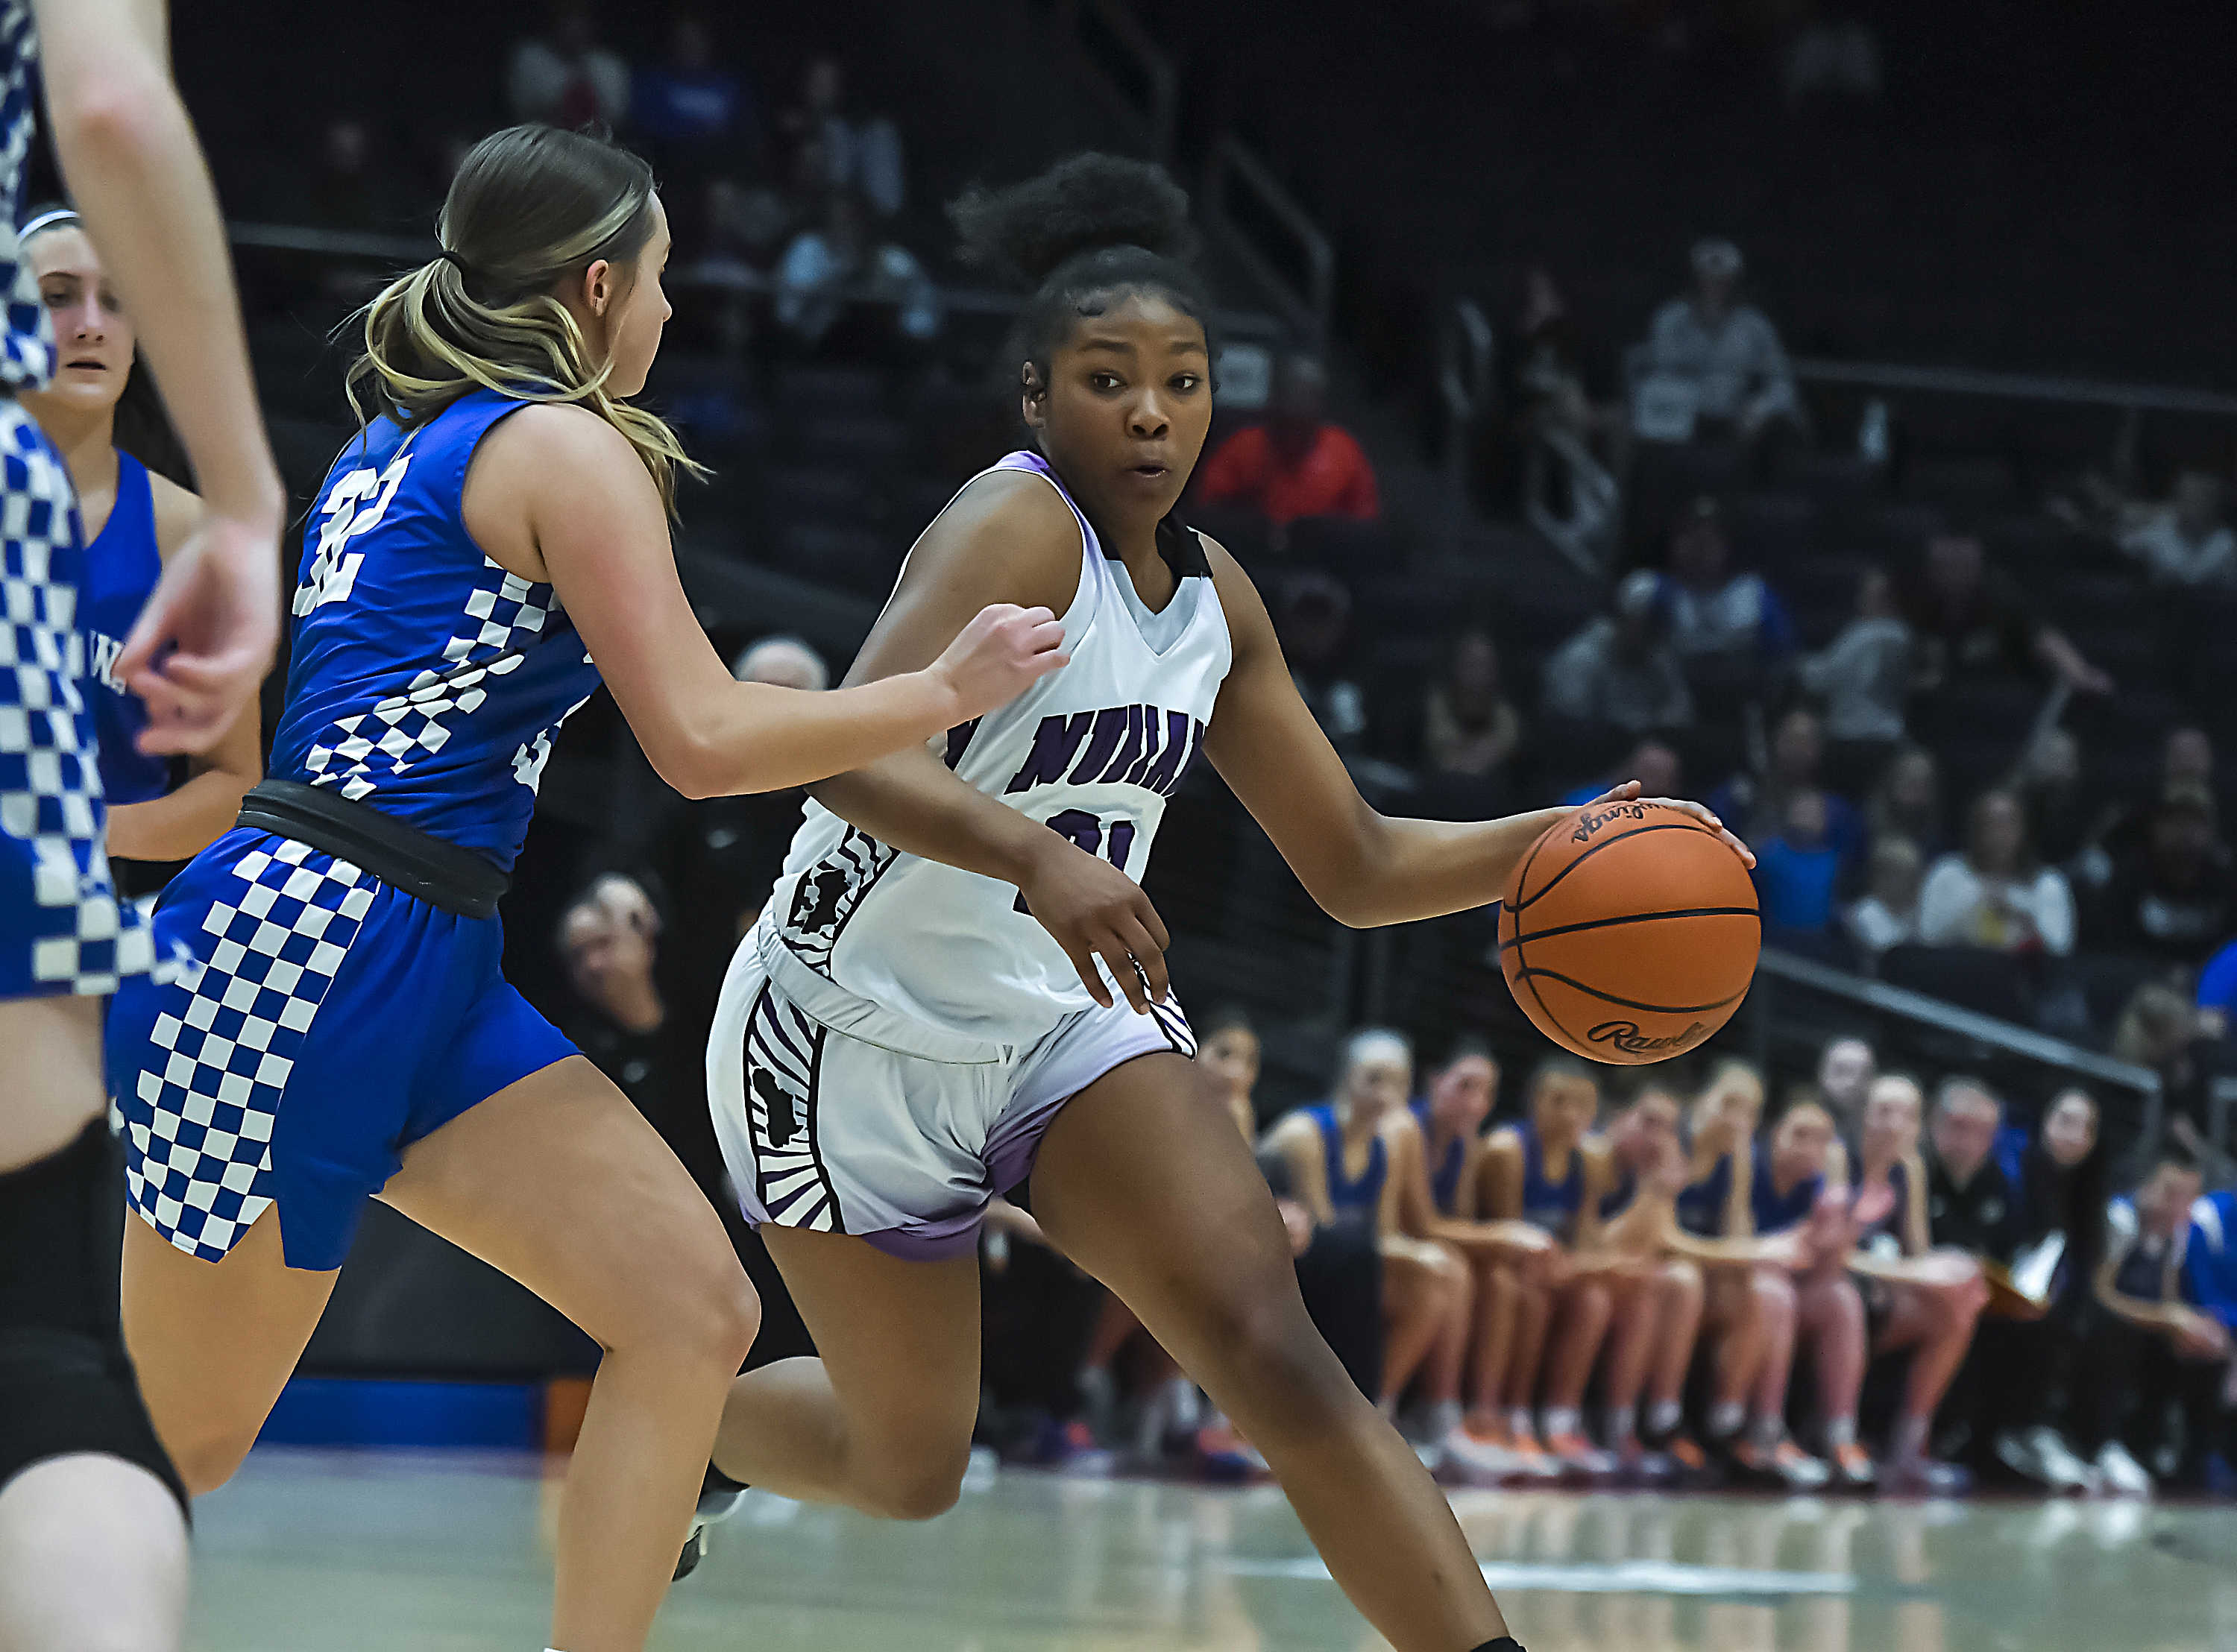 Natiah Nelson of Africentric drives against Chippewa in the 2023 OHSAA Division III state championship game.